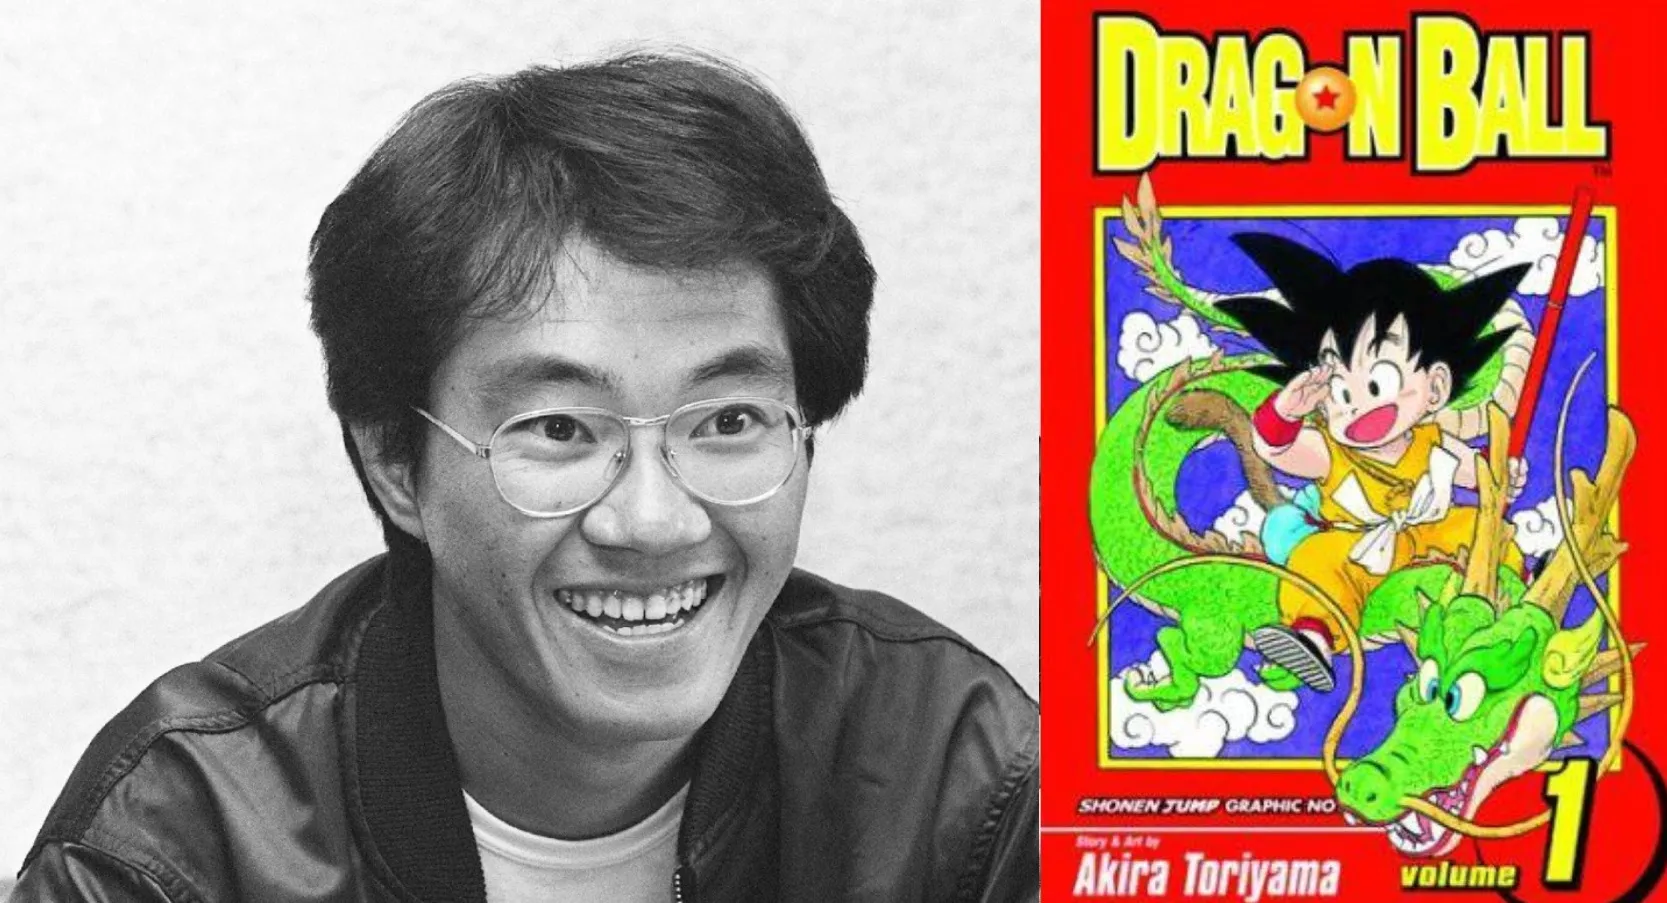 Akira Toriyama the legendary creator of Dragon Ball died at the age of 68